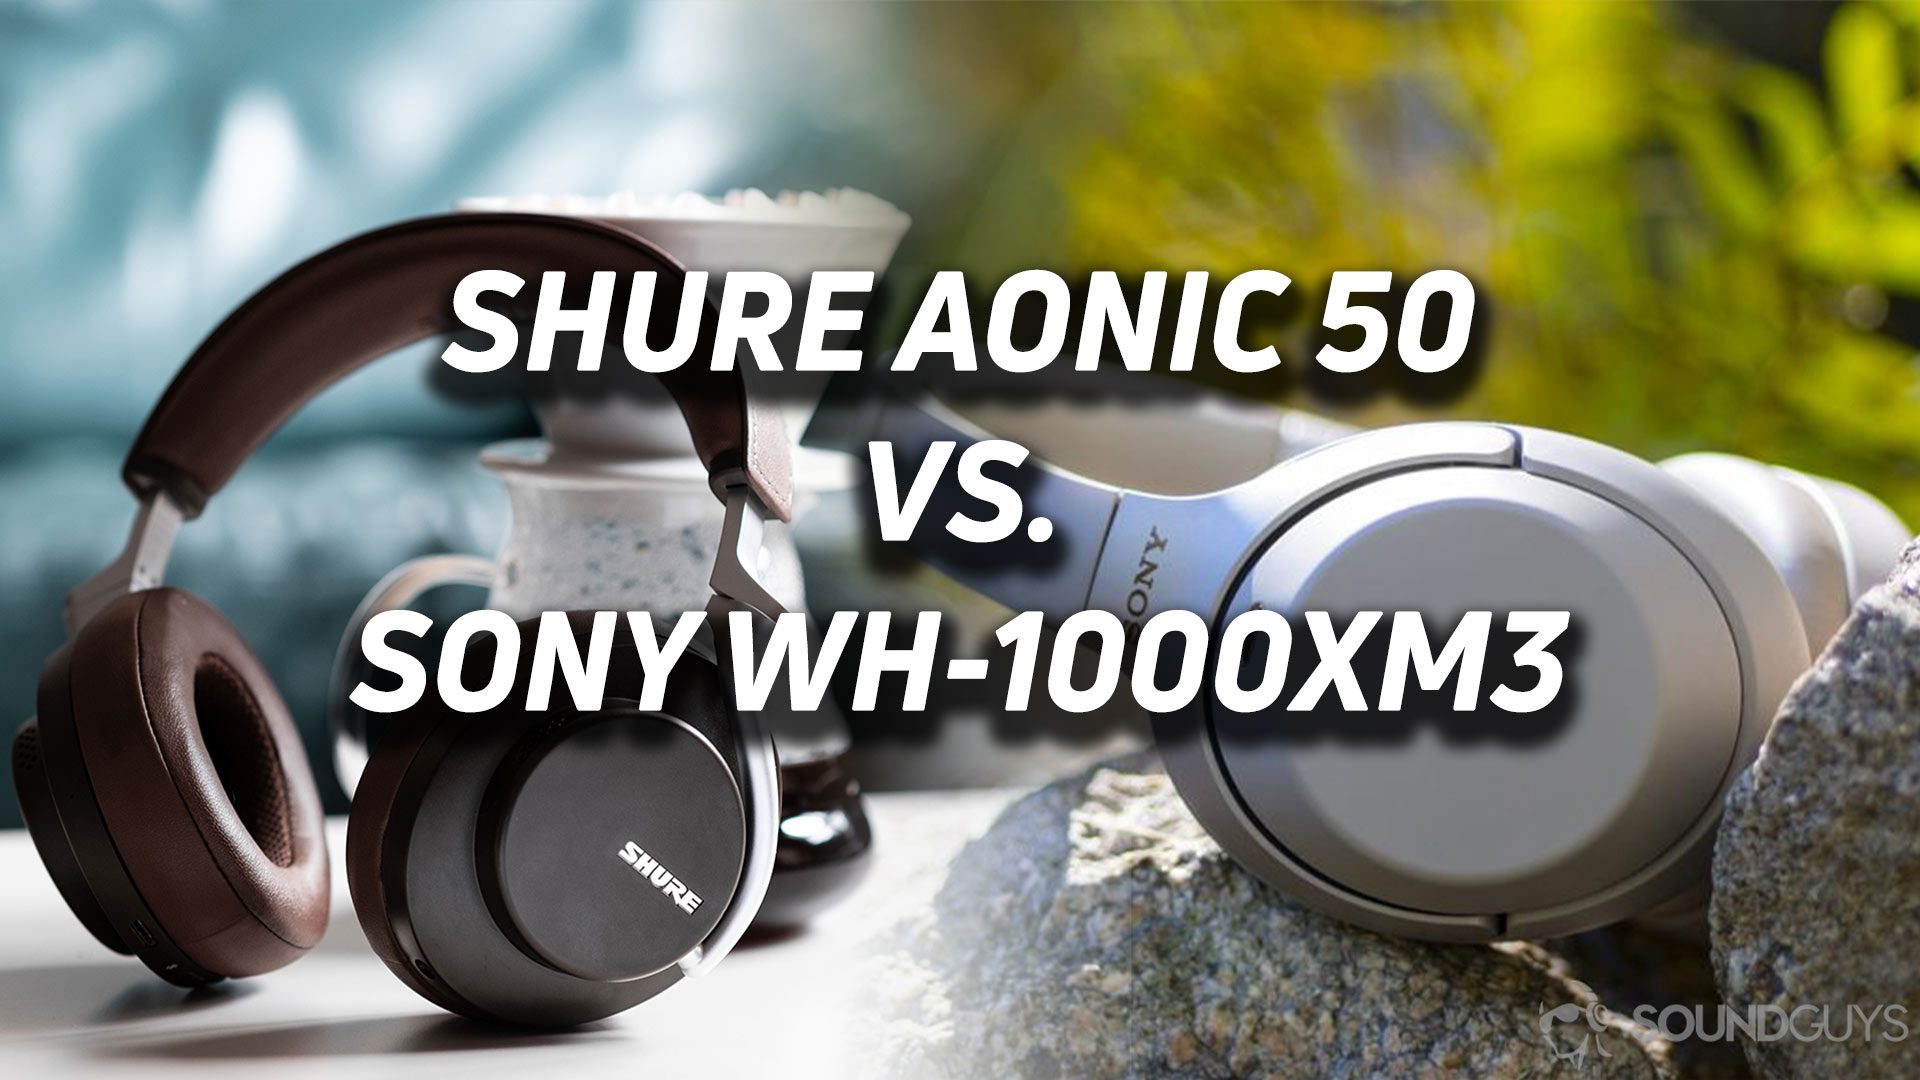 A blended image of the Shure Aonic 50 next to the Sony WH-1000XM3 noise canceling headphones.